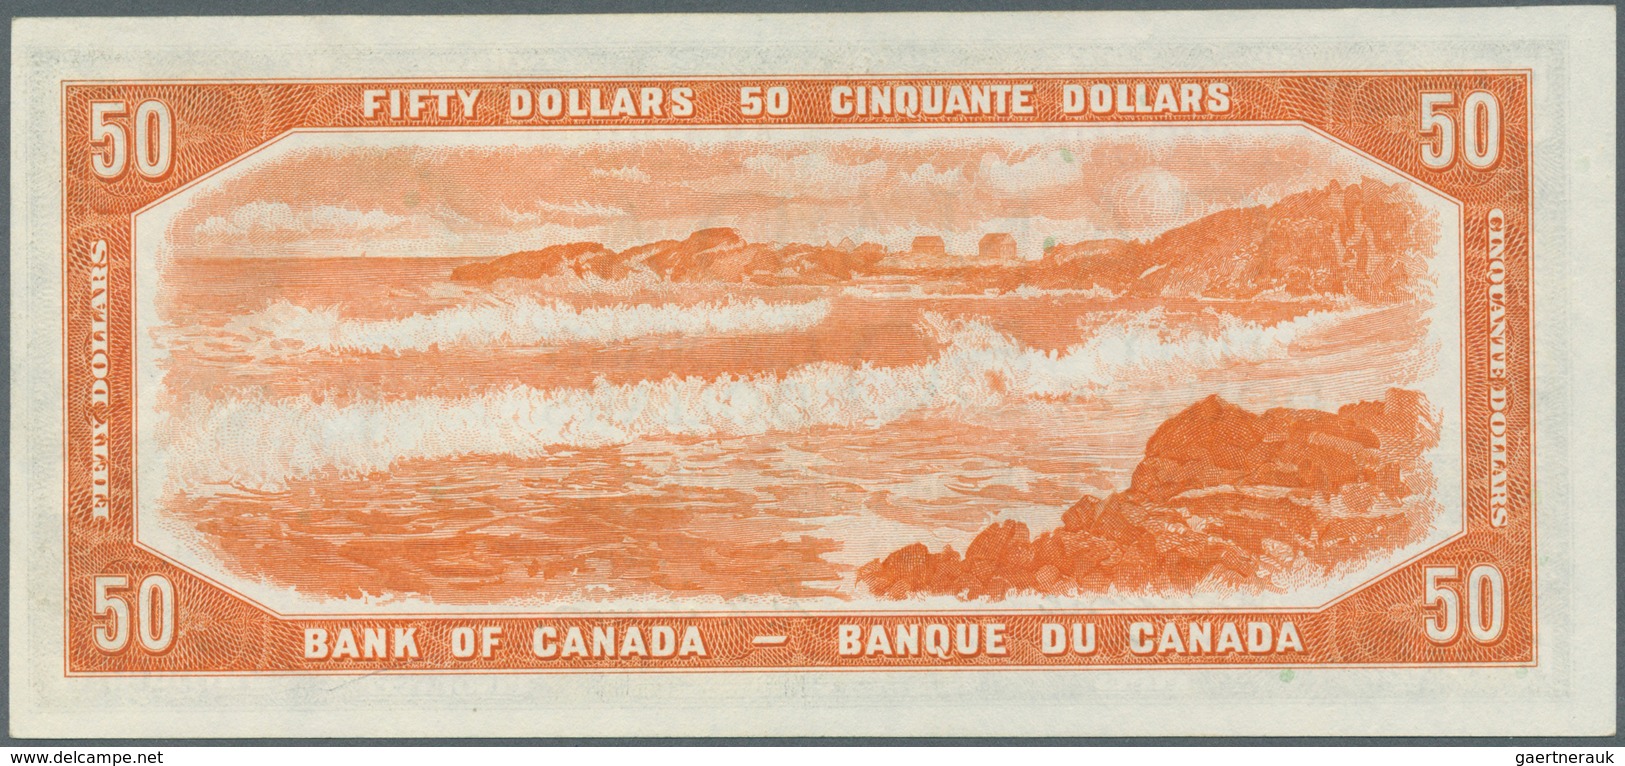 Canada: 50 Dollars 1954 "Devil's Face Hair Style" Issue With Signature Coyne & Towers, P.71a, Highly - Canada